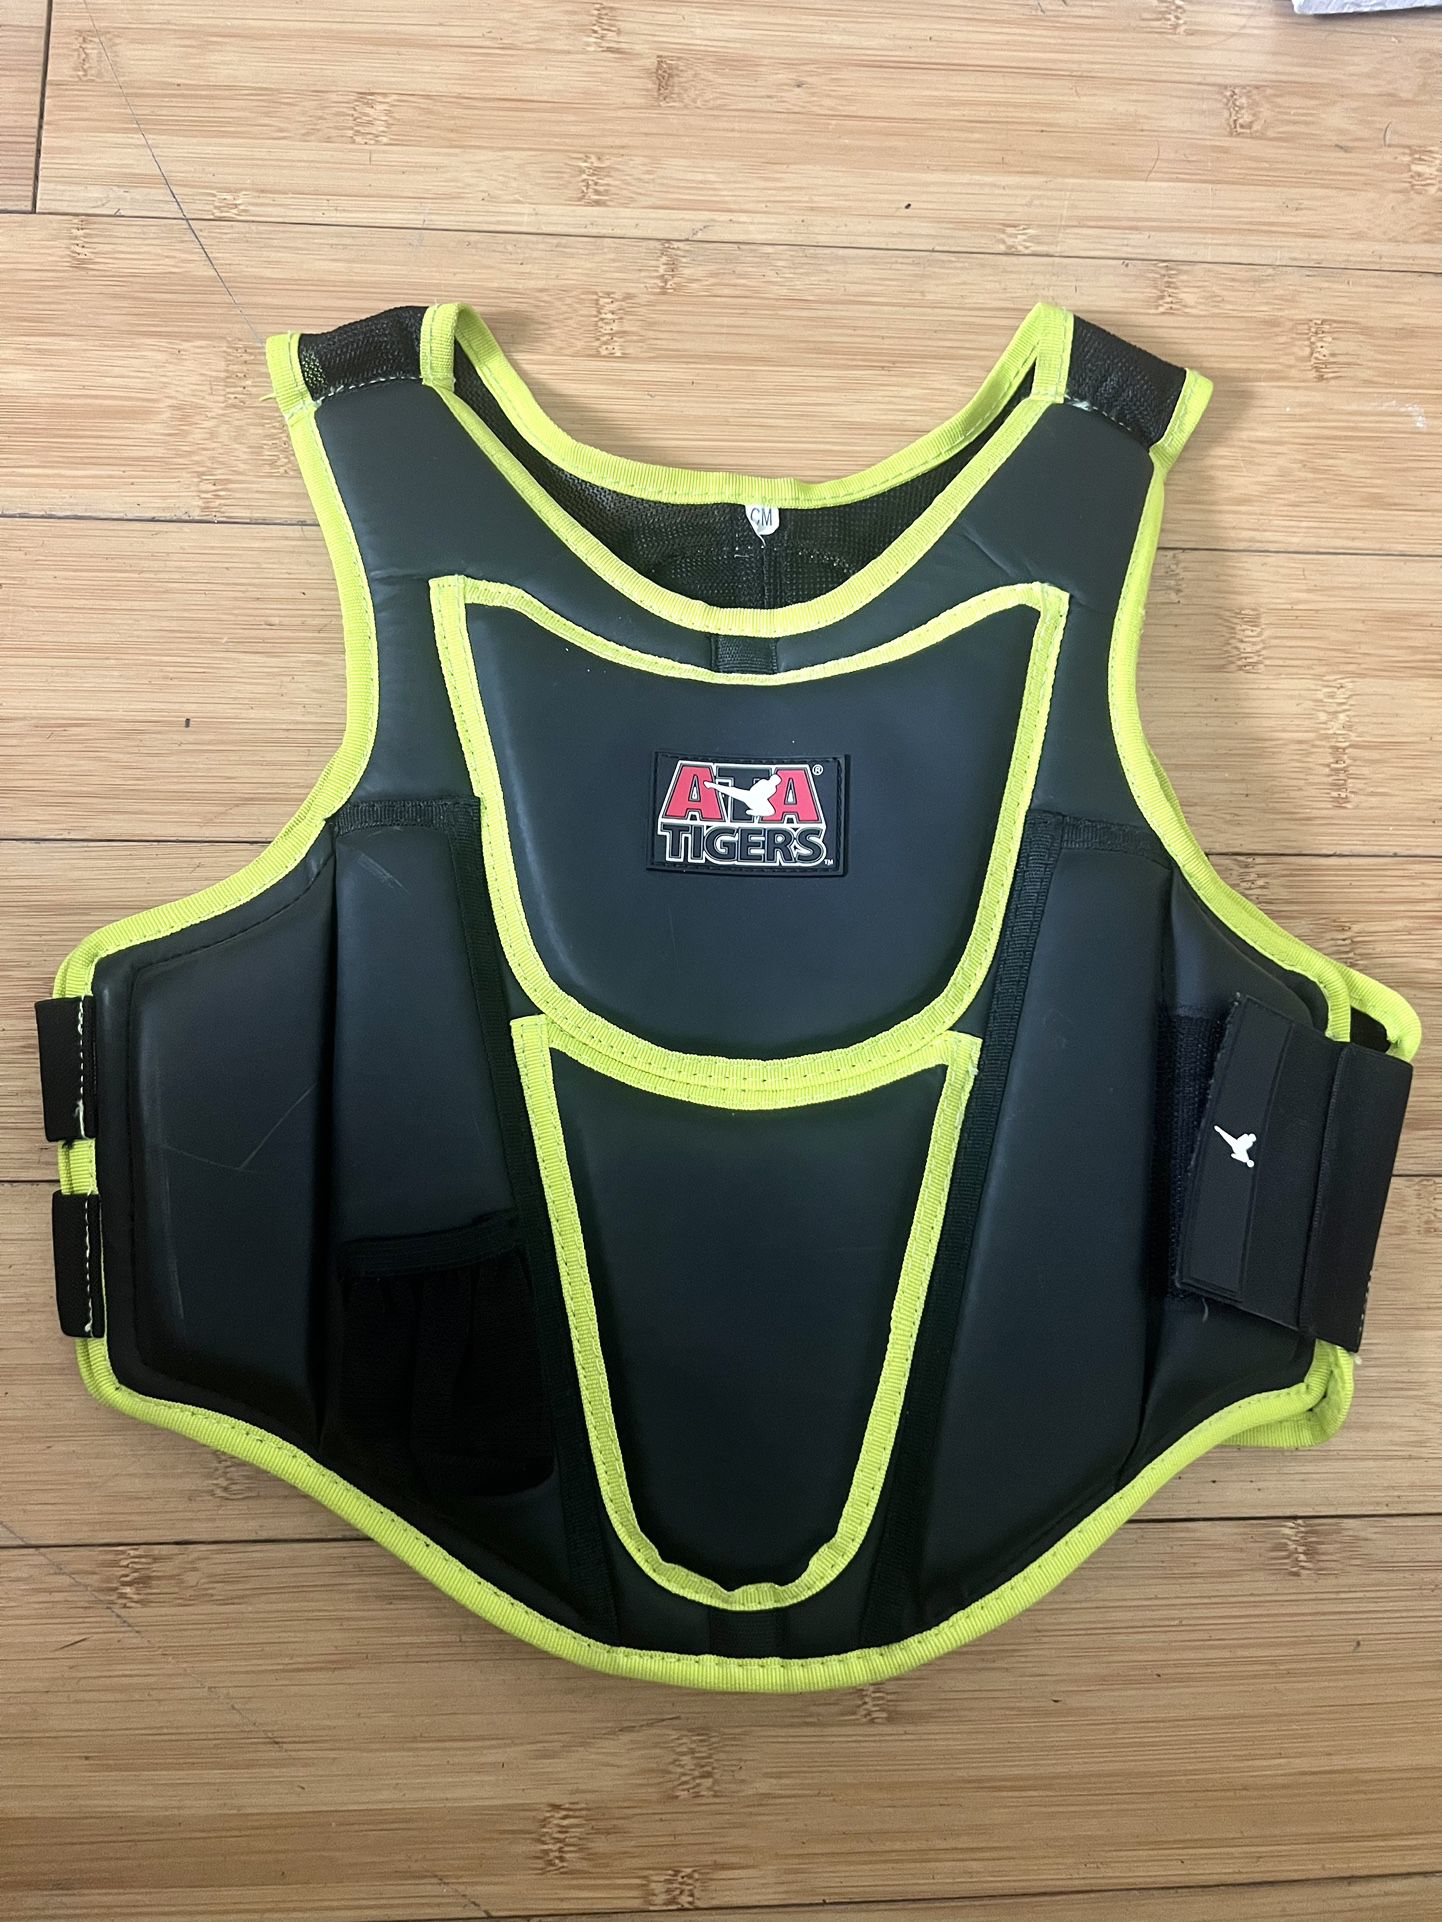 Chest Protector Vest For Kids Martial Arts 